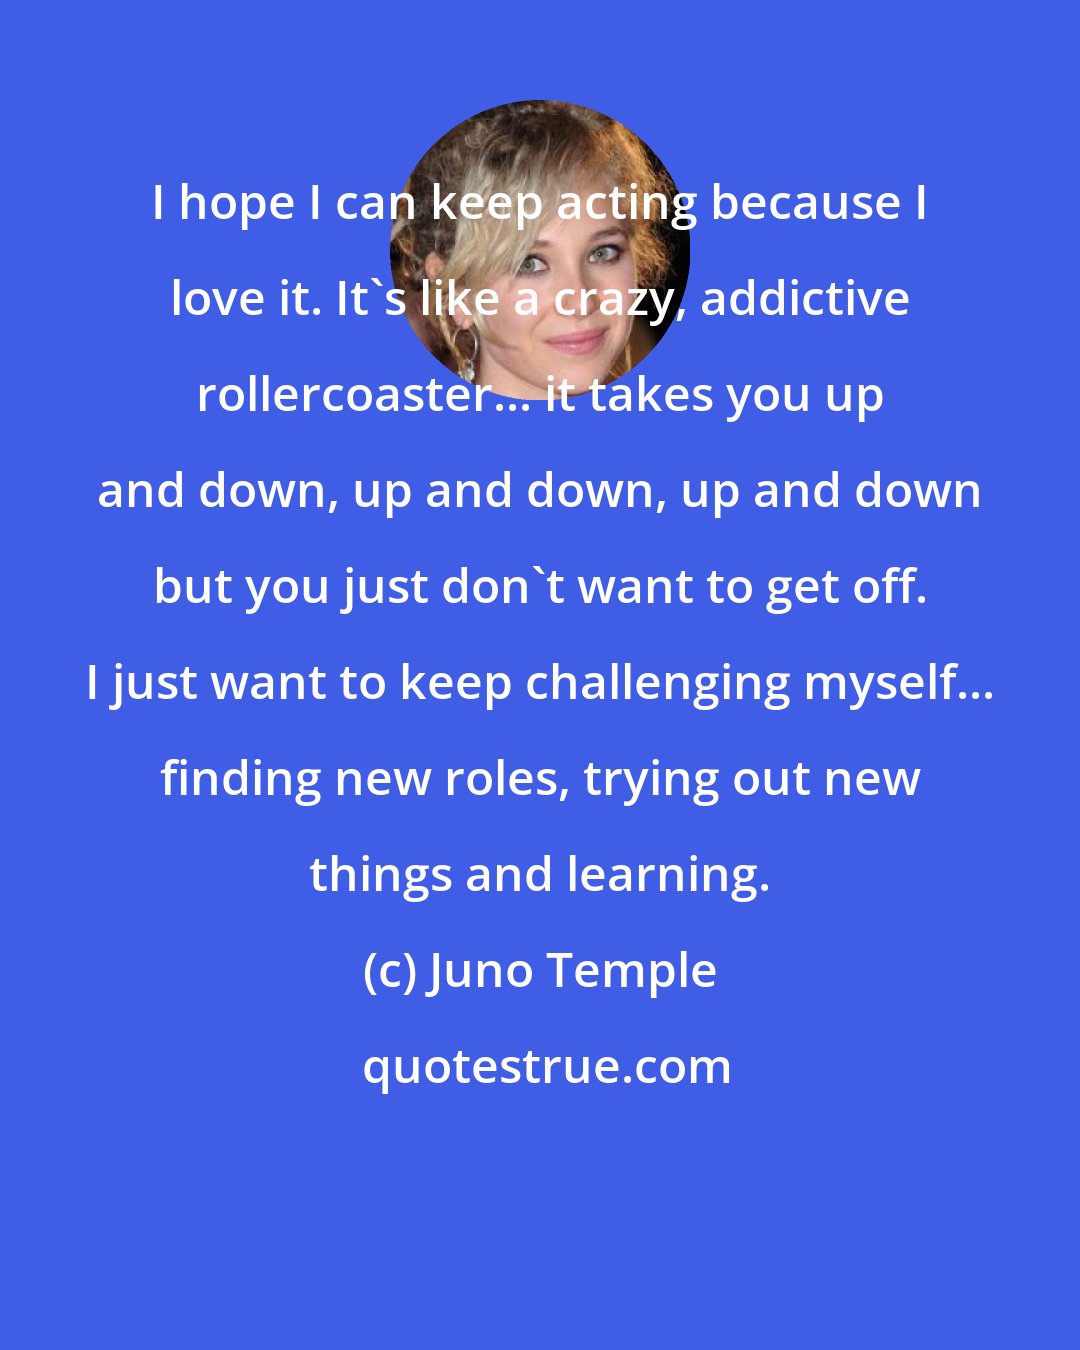 Juno Temple: I hope I can keep acting because I love it. It's like a crazy, addictive rollercoaster... it takes you up and down, up and down, up and down but you just don't want to get off. I just want to keep challenging myself... finding new roles, trying out new things and learning.